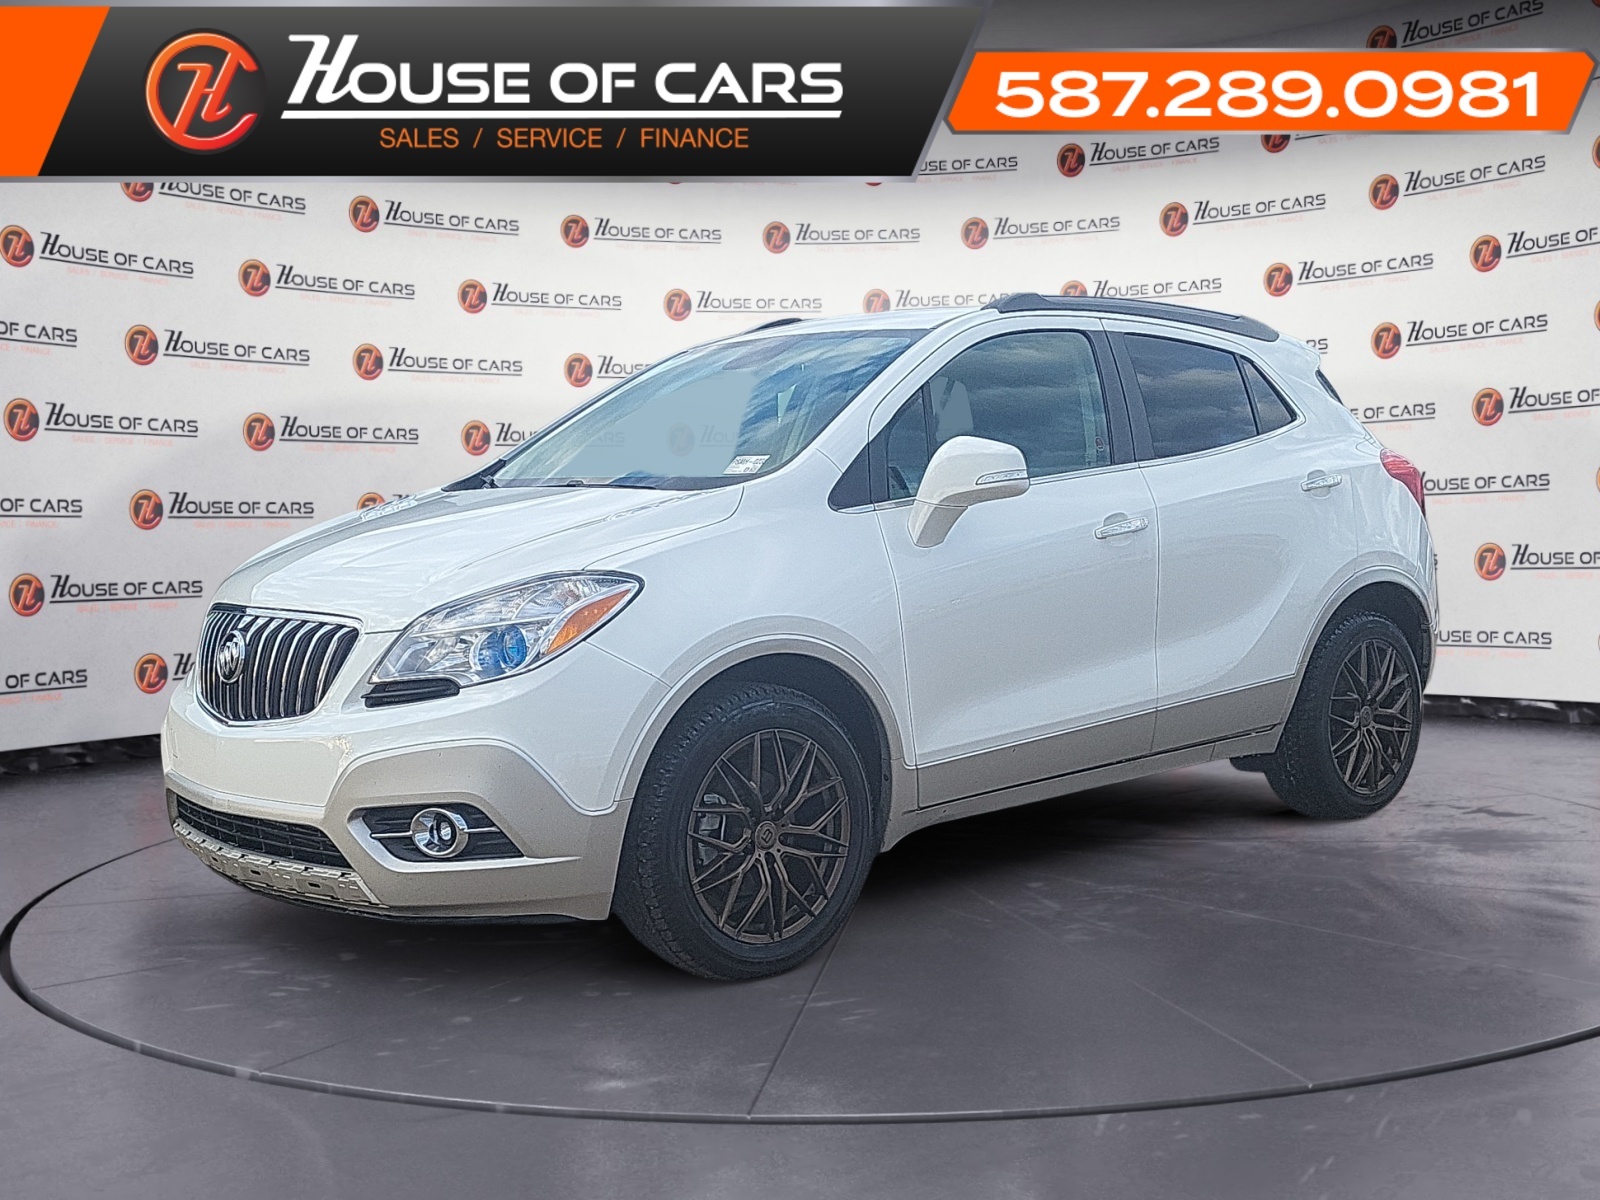 2015 Buick Encore FWD 4dr Leather